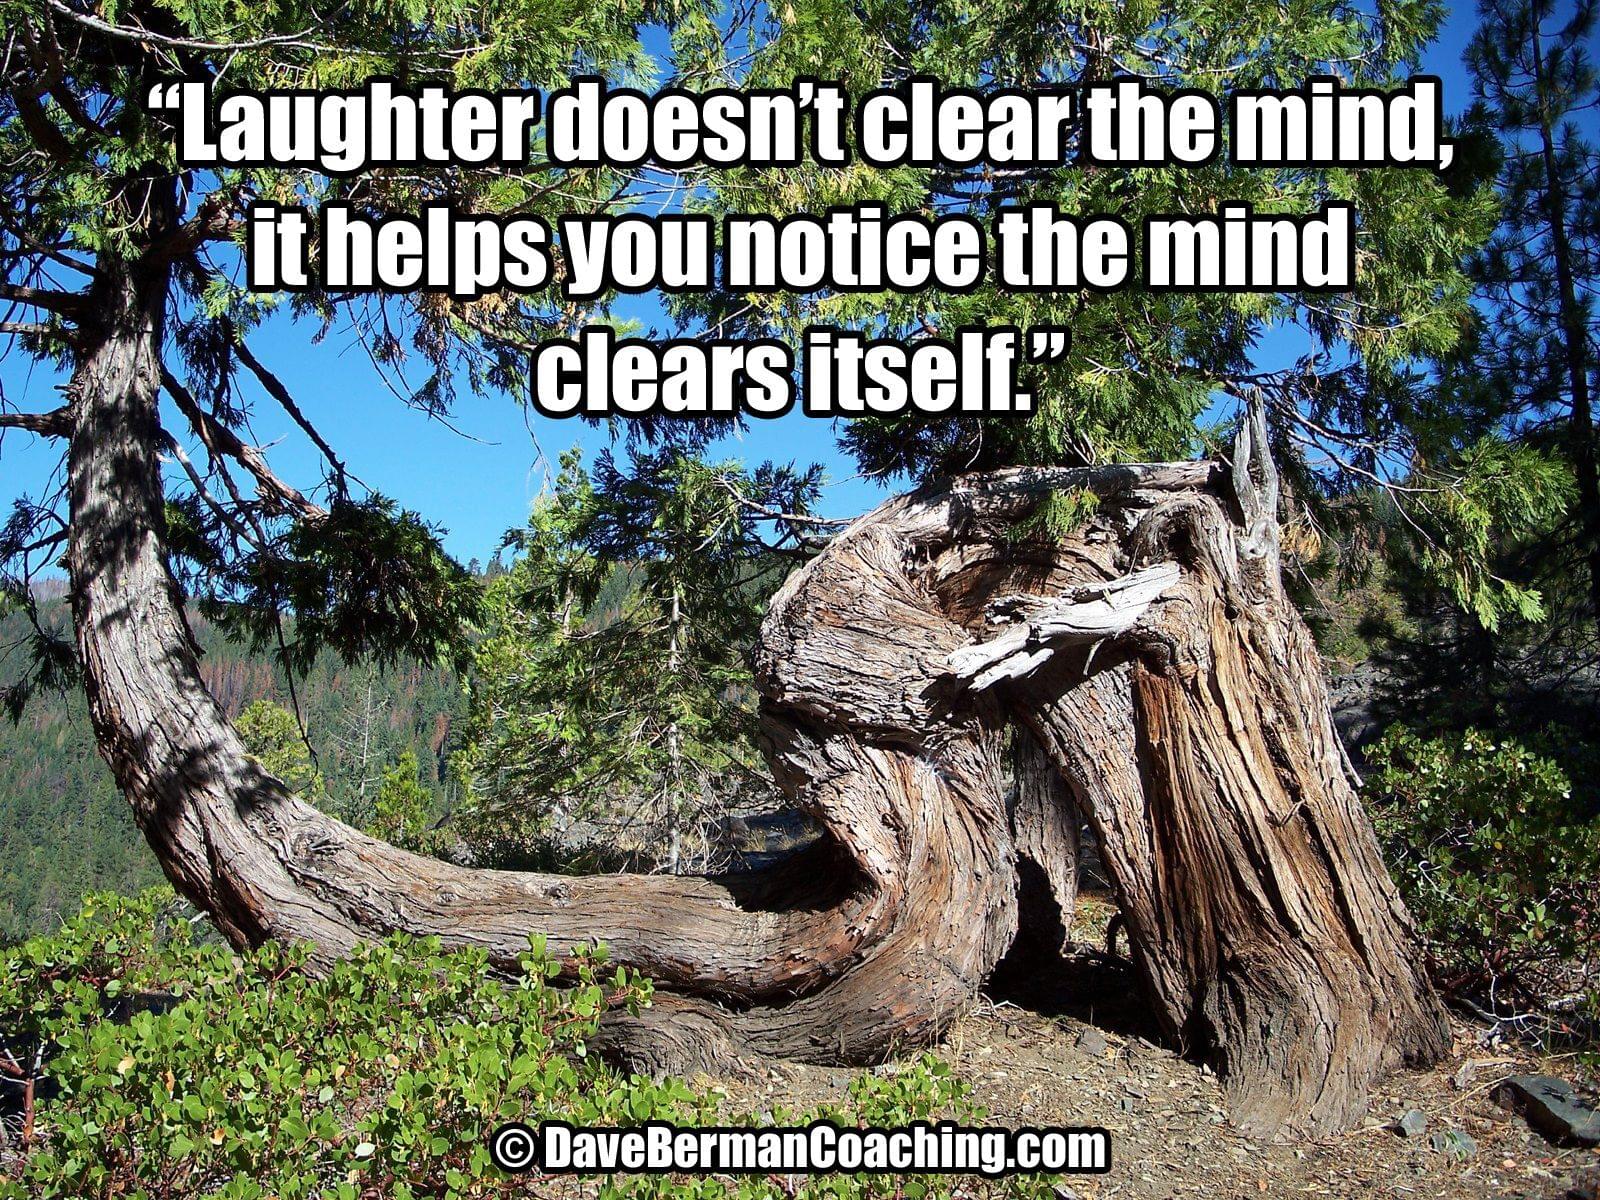 Laughter doesn't clear the mind, it helps you notice the mind clears itself - DaveBermanCoaching.com